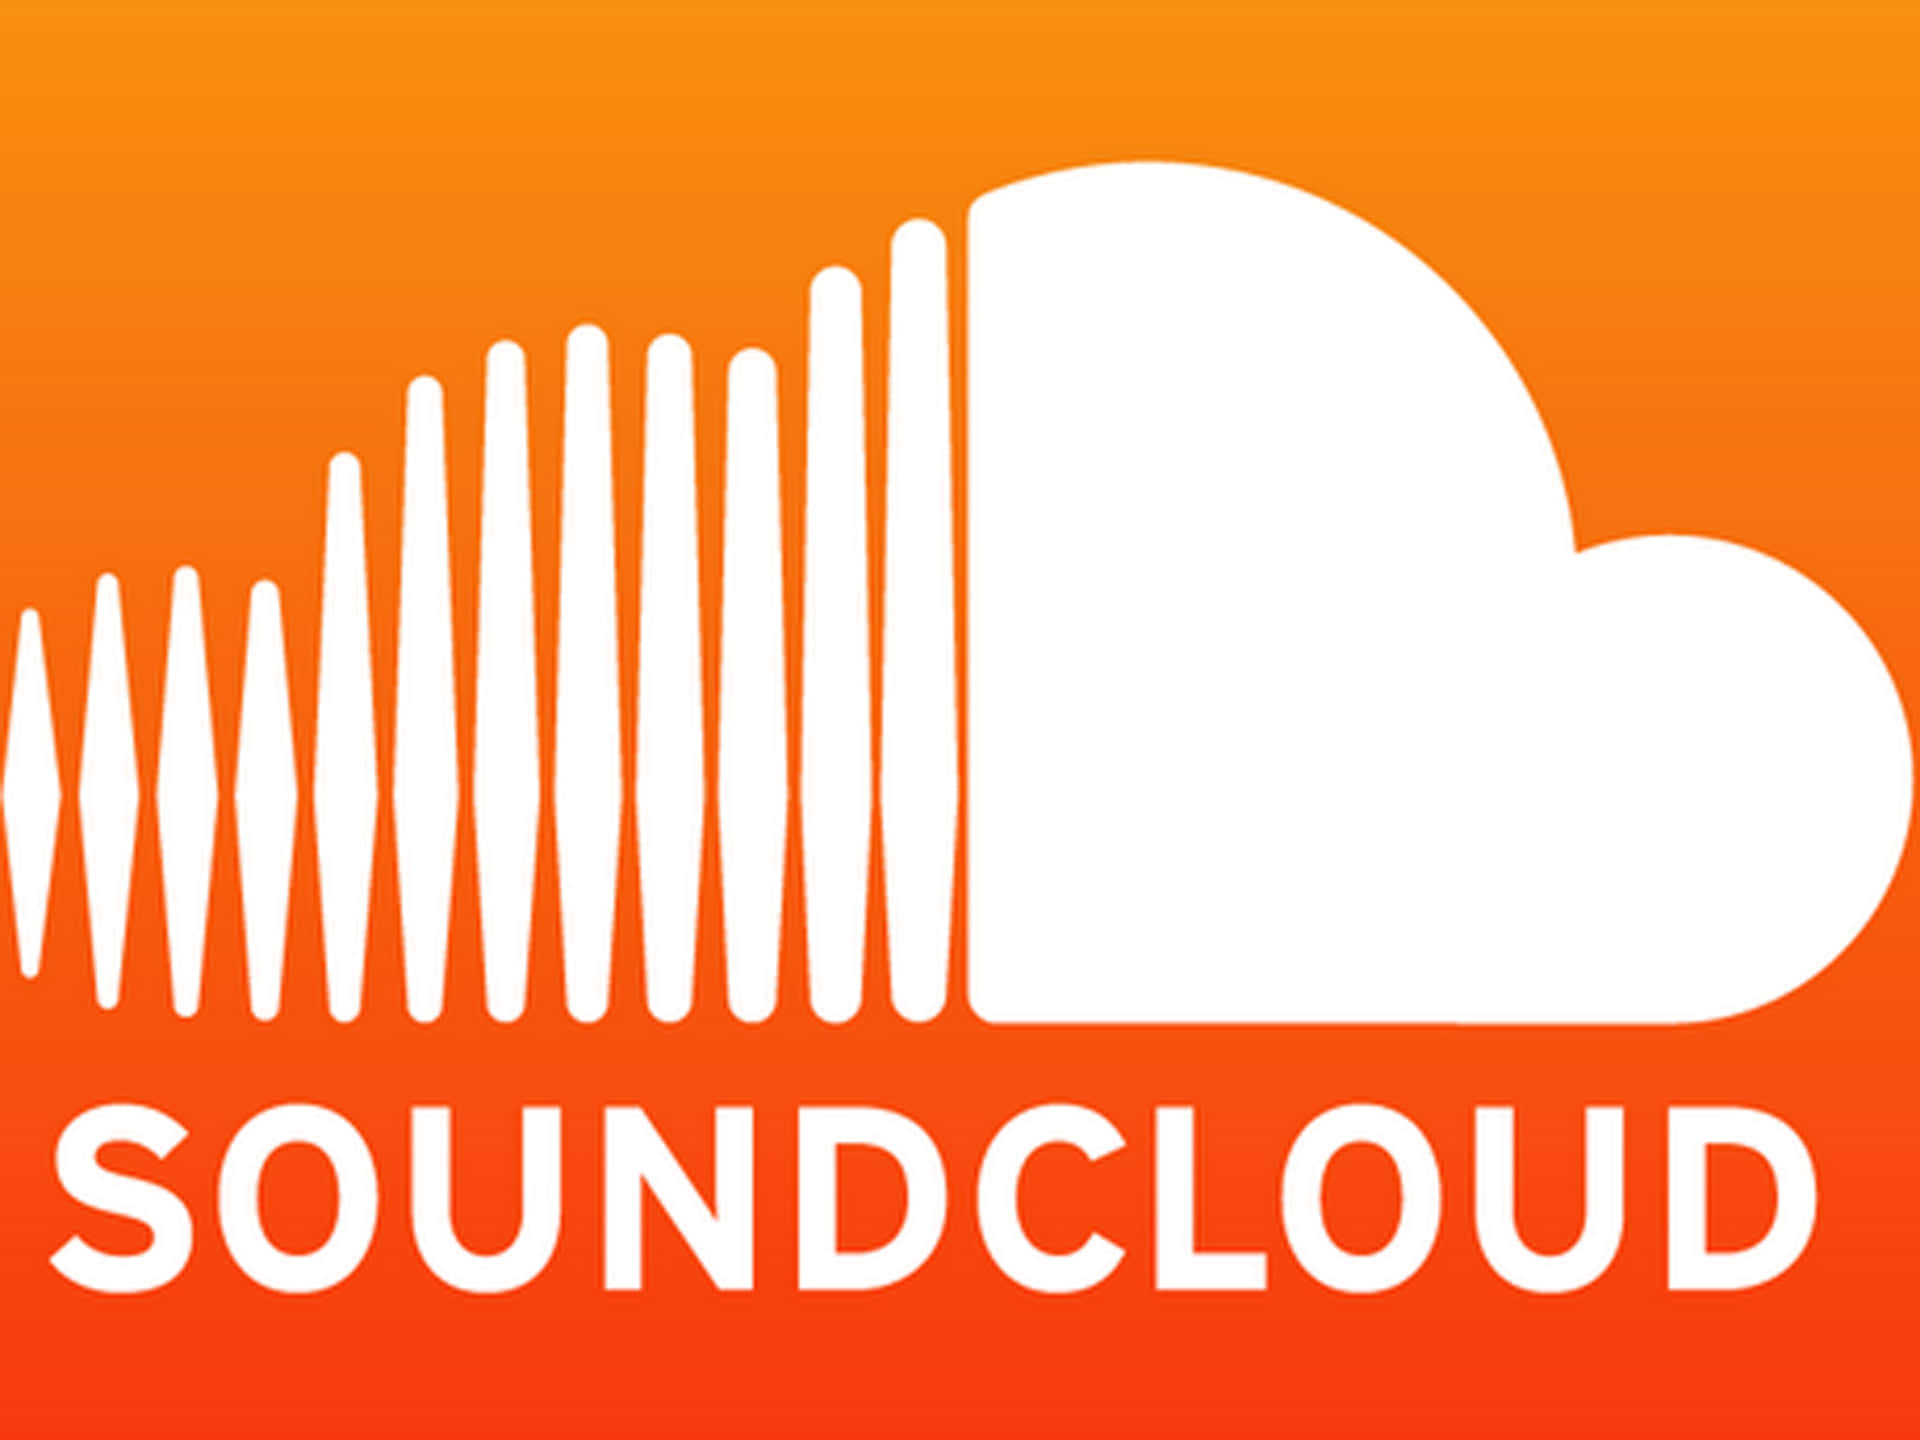 Experience unlimited music with Soundcloud